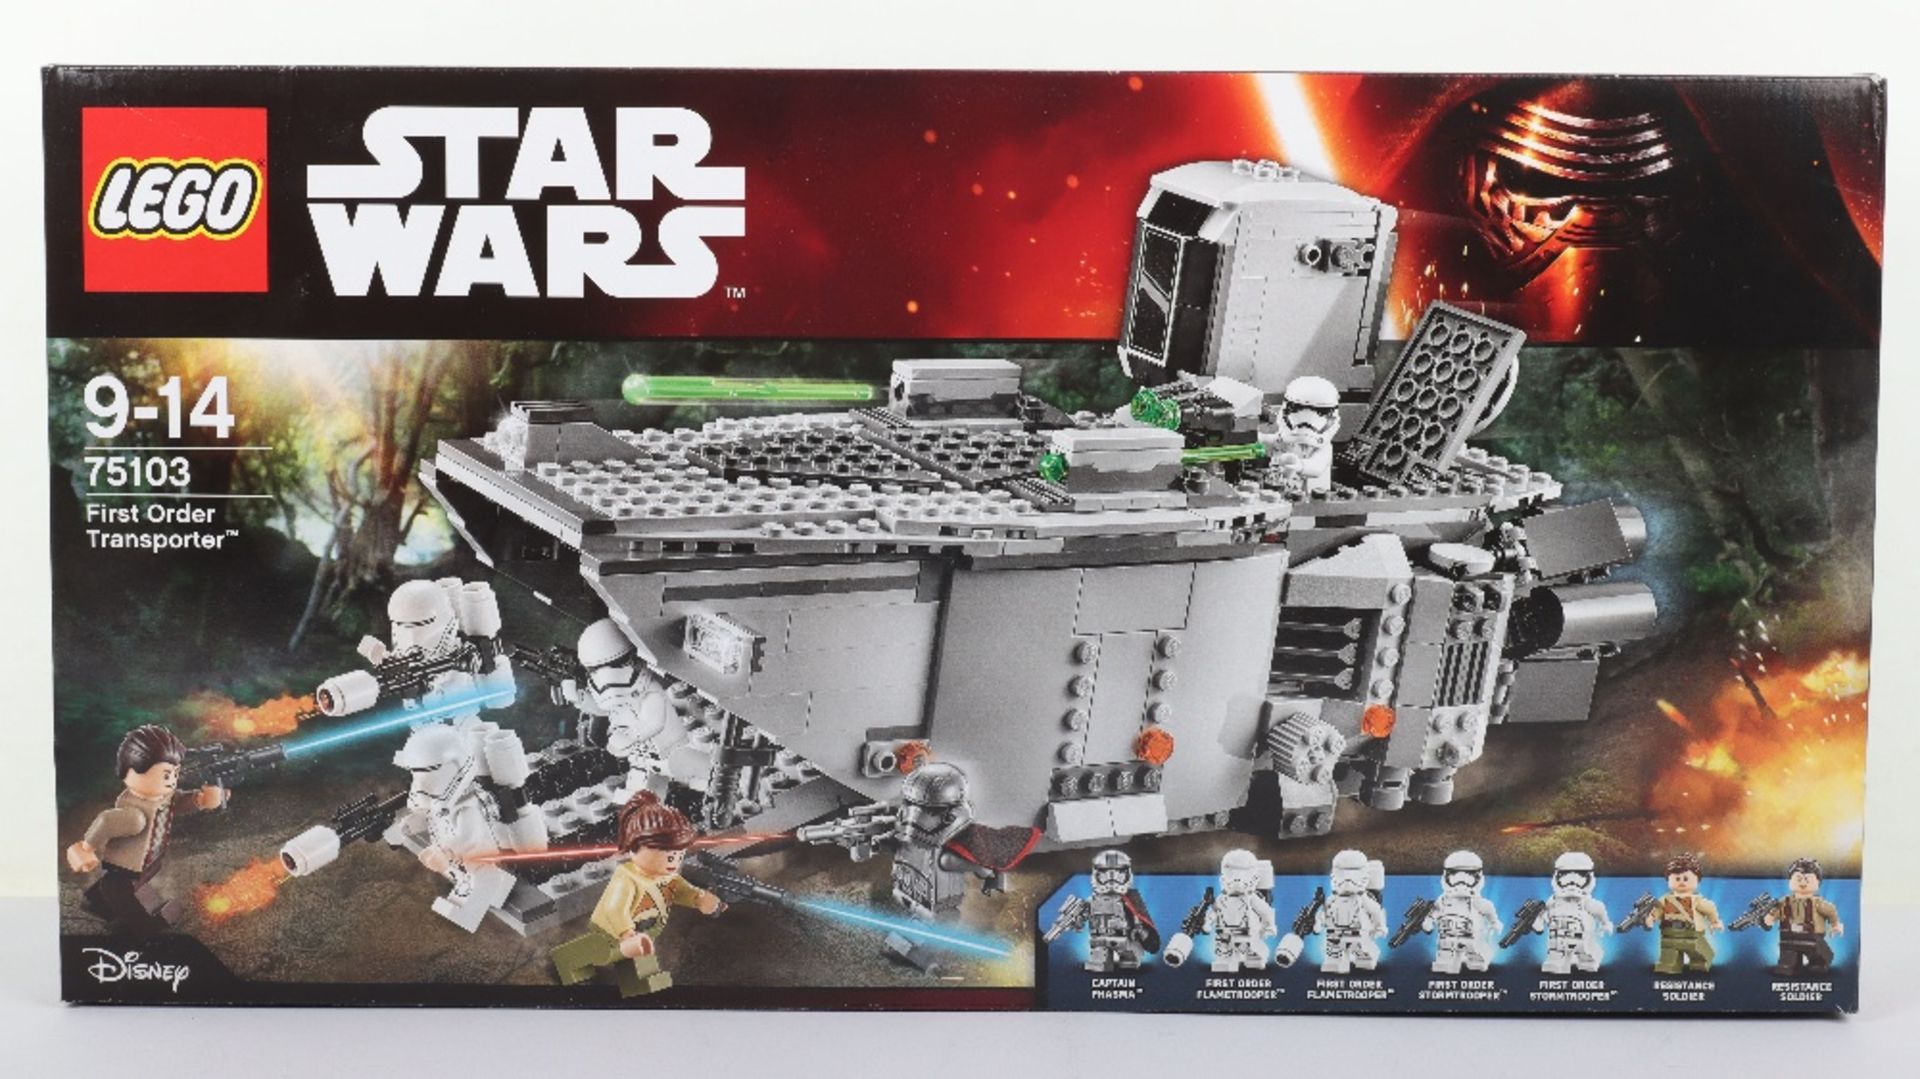 Lego Star Wars 75103 and 5002948 sealed boxed sets - Image 4 of 11